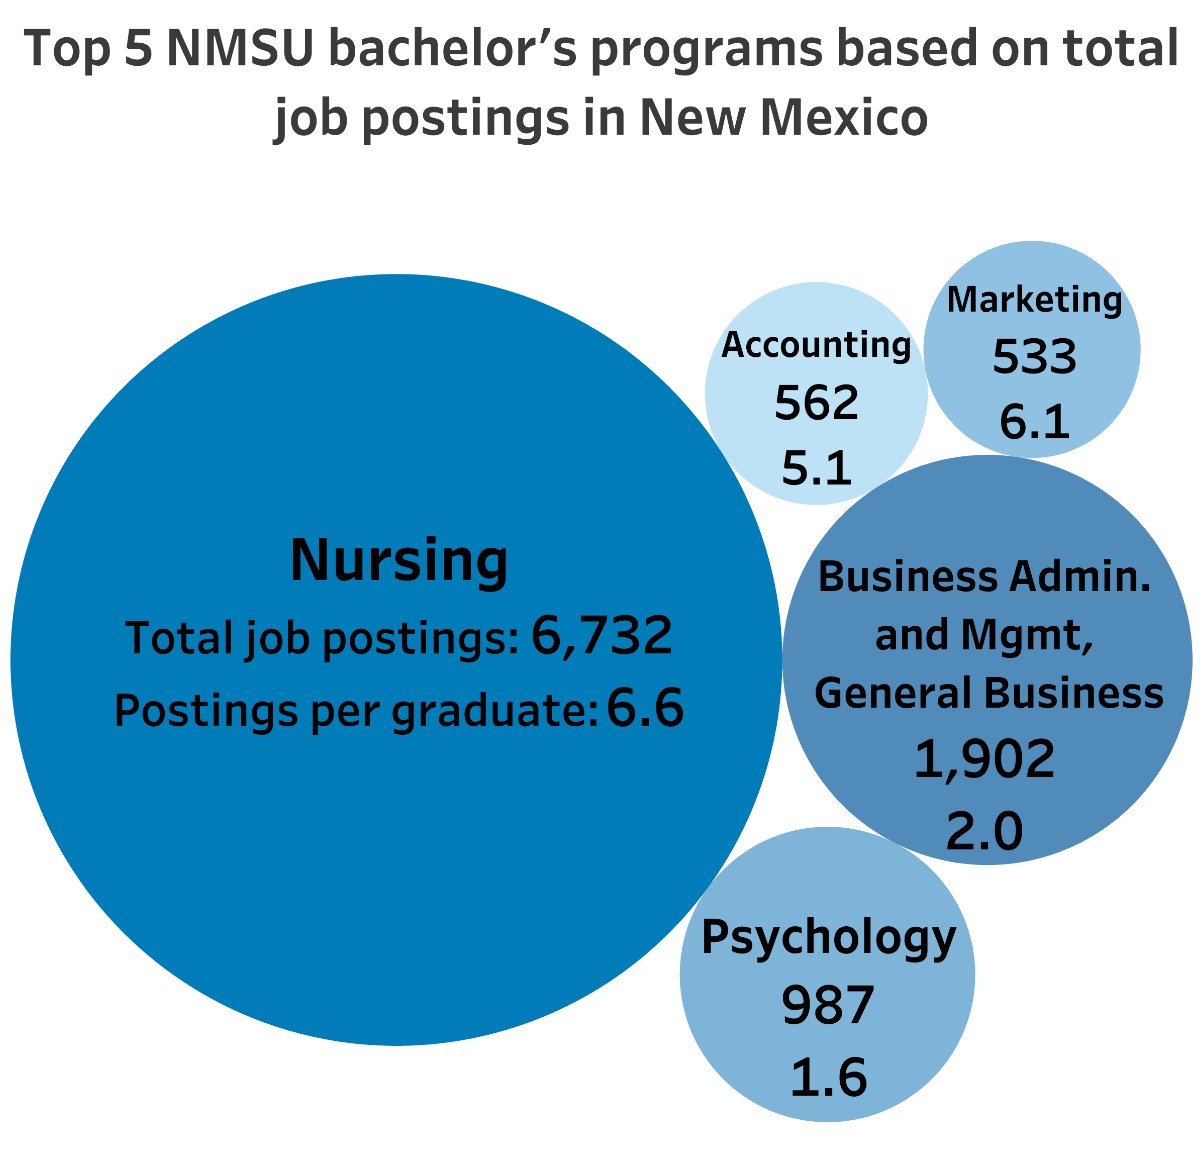 Bubble graph showing the top 5 bachelor programs based on total job postings in New Mexico. 